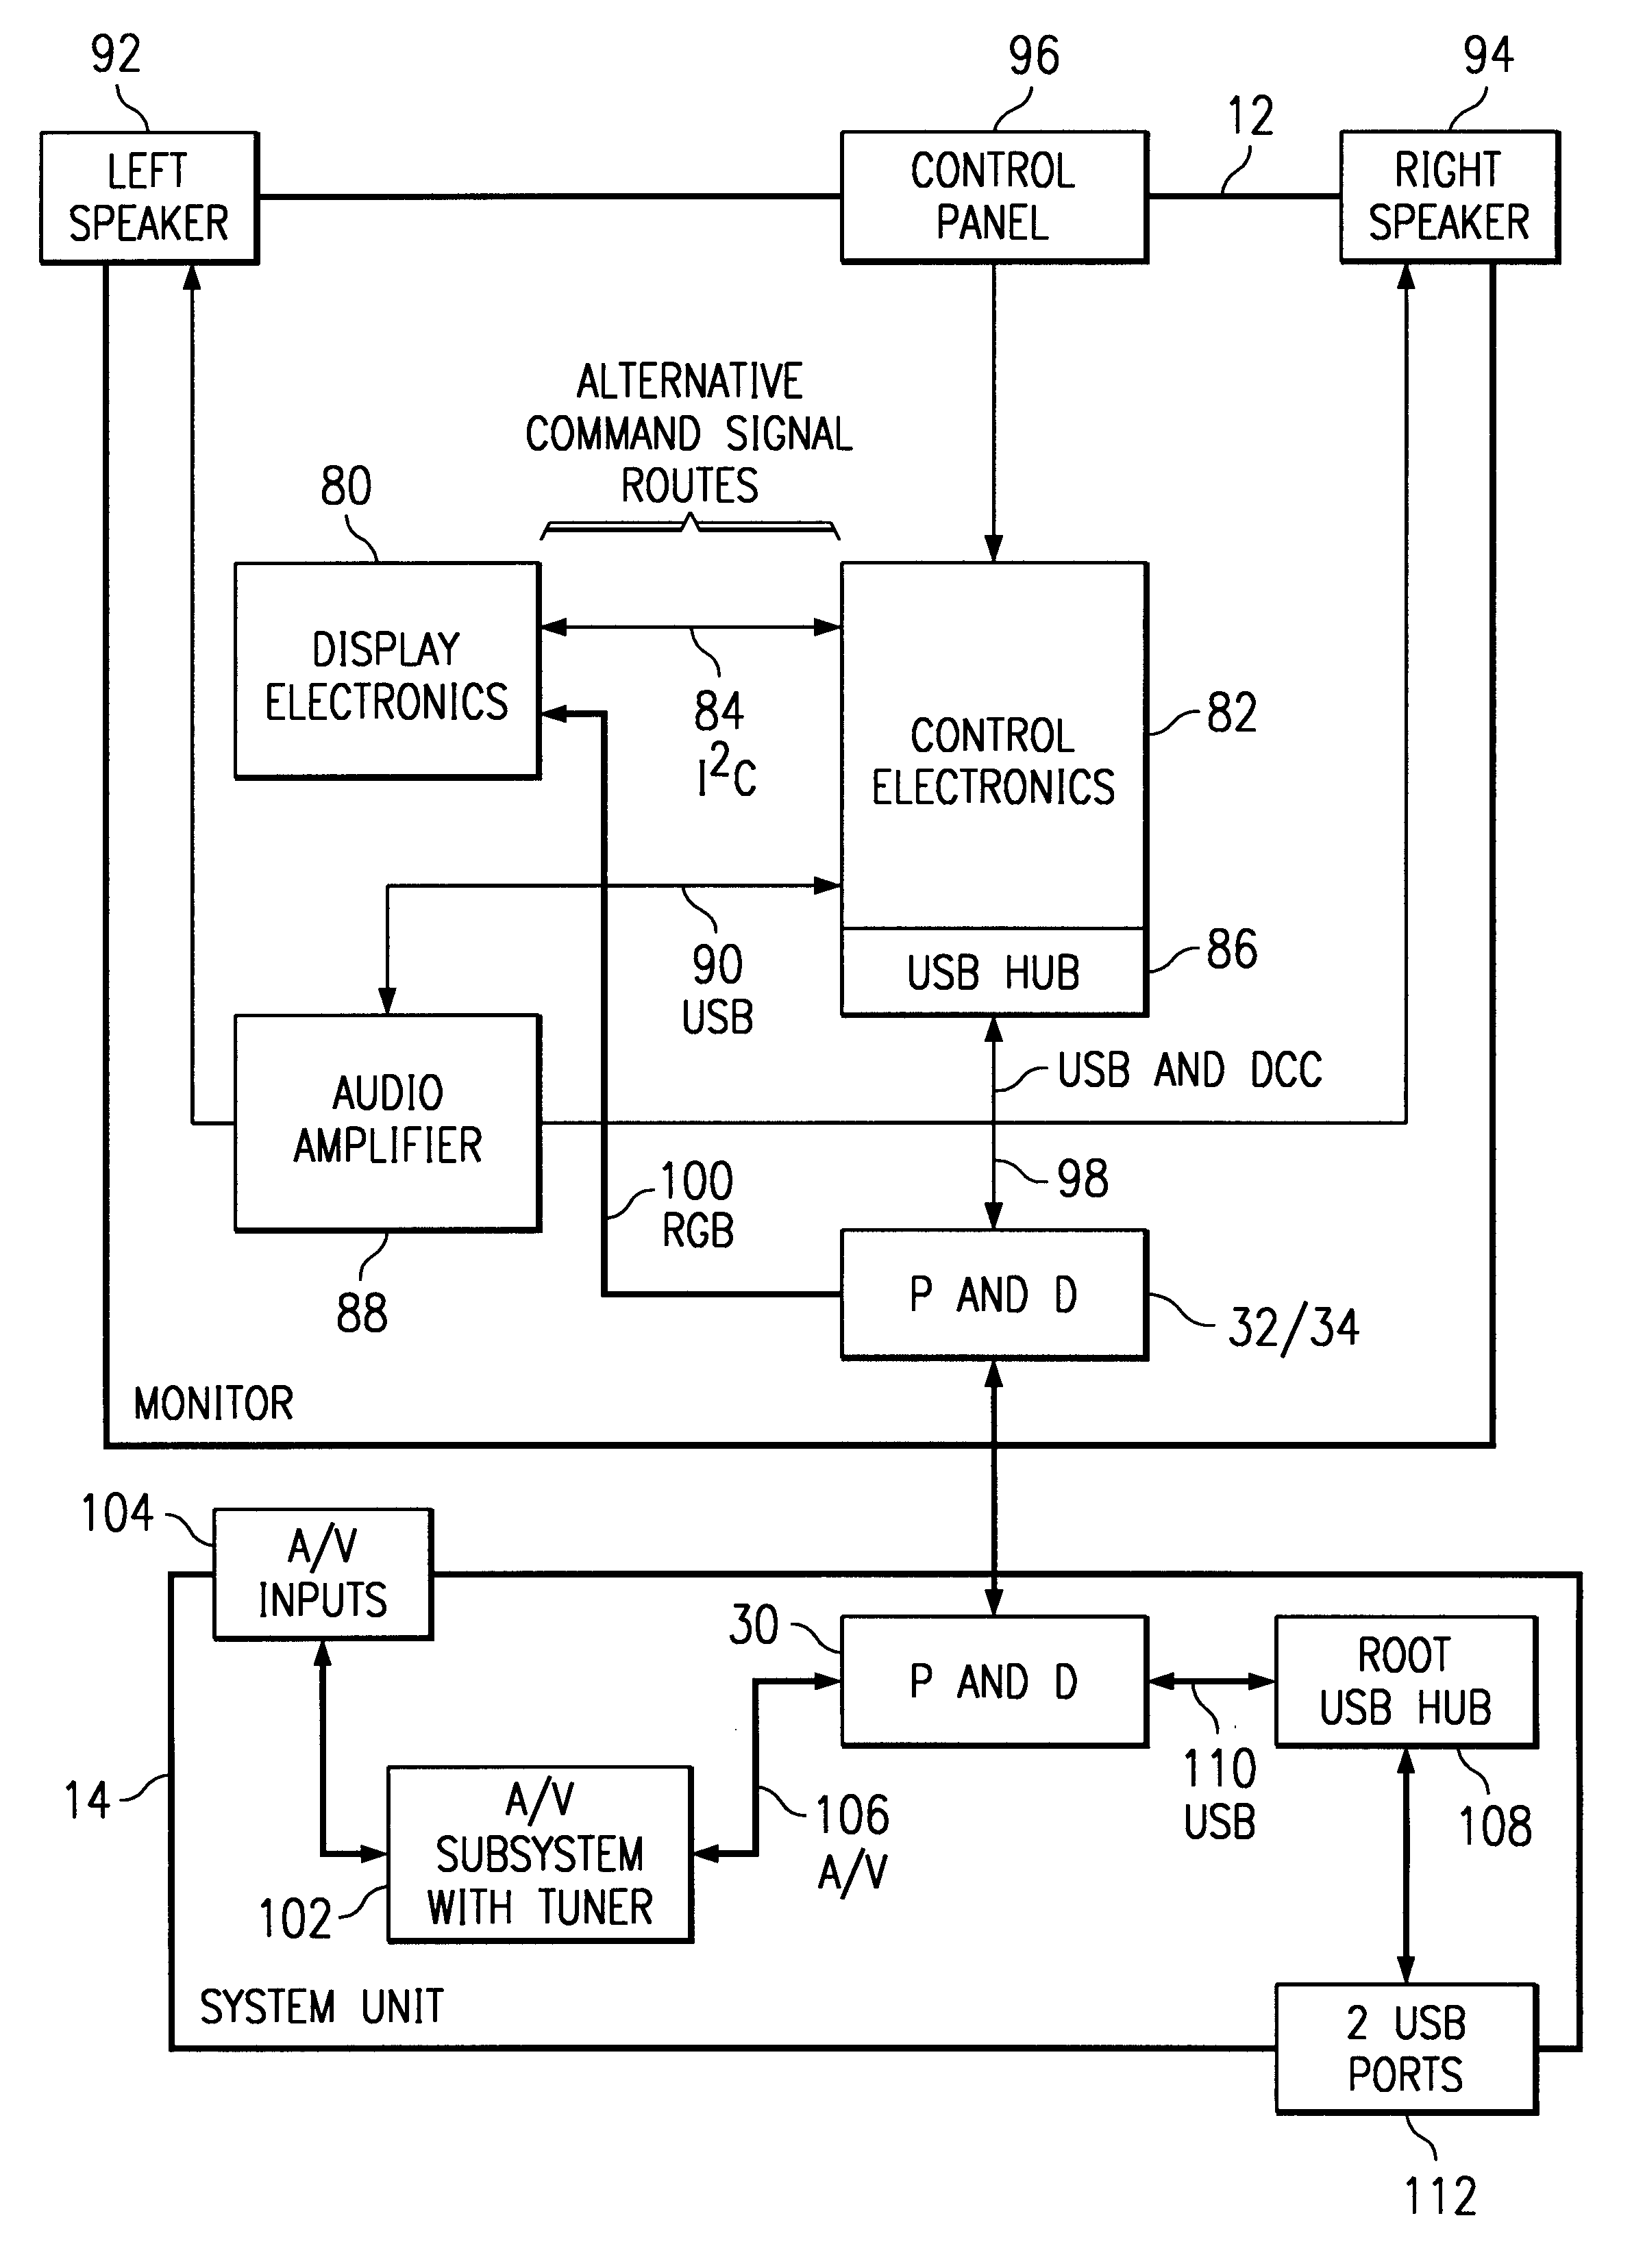 Universal multi-pin plug and display connector for standardizing signals transmitted between a computer and a display for a PC theatre interconnectivity system